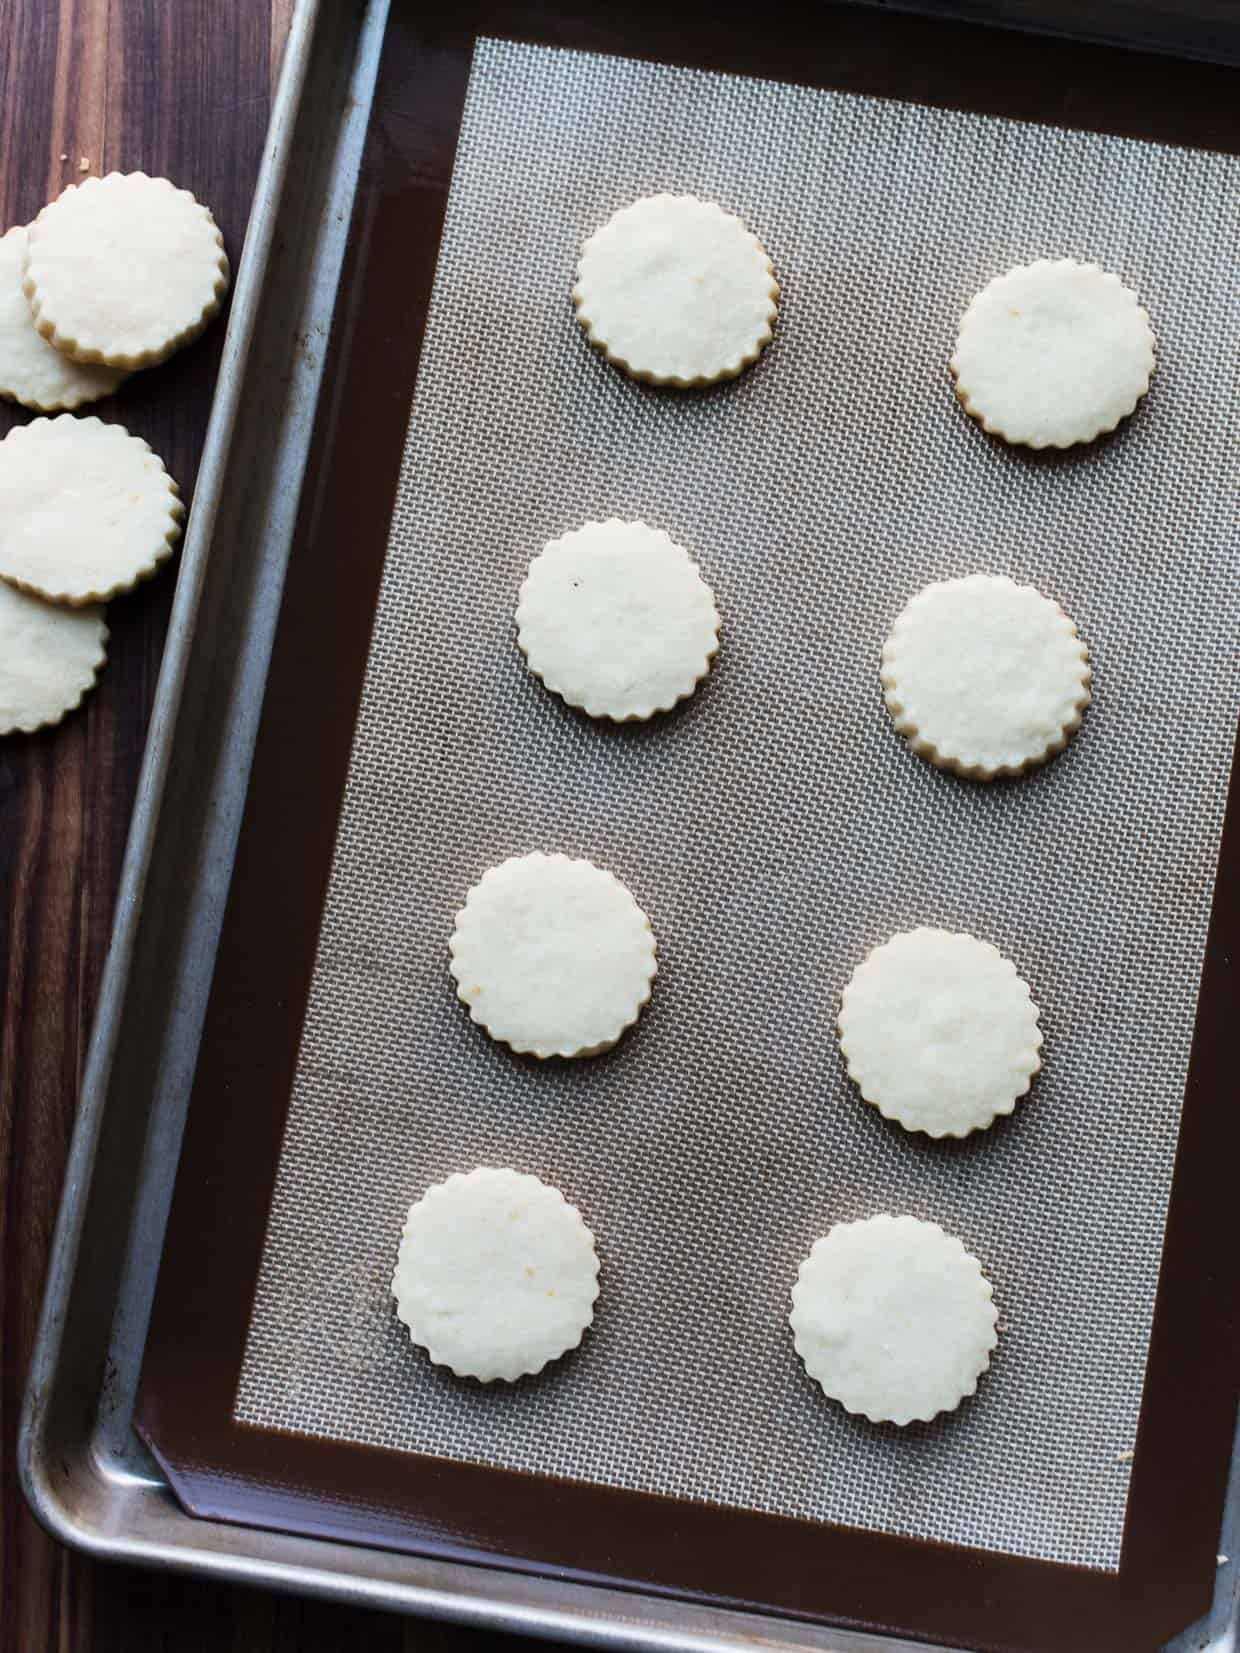 Alfajores (a sandwich cookie made with tender shortbread) on a baking sheet.